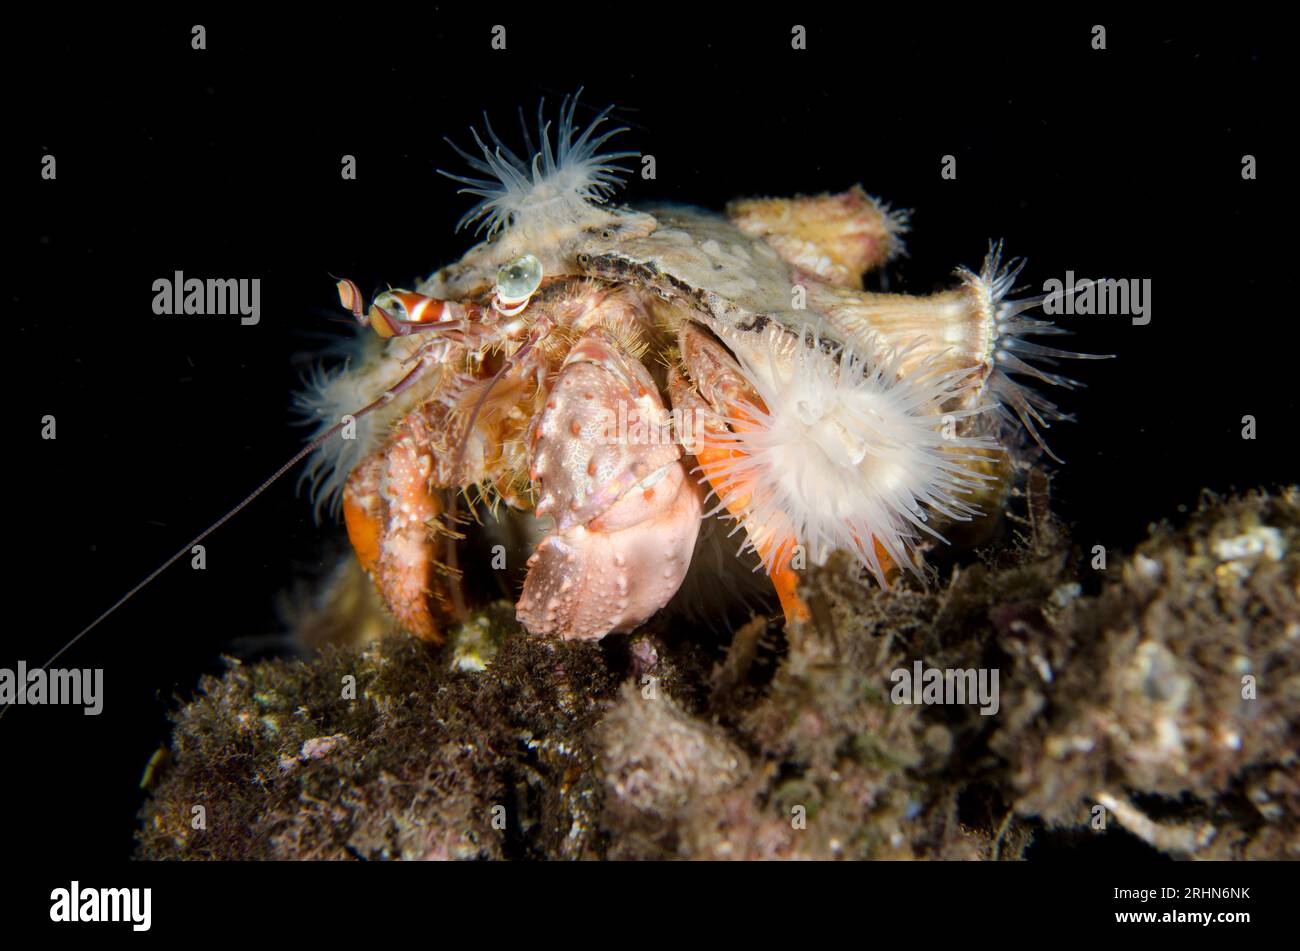 Anemone Hermit Crab, Dardanus pedunculatus, with anemones, Calliactis polypus, on shell for camouflage and protection, night dive, TK1 dive site, Lemb Stock Photo